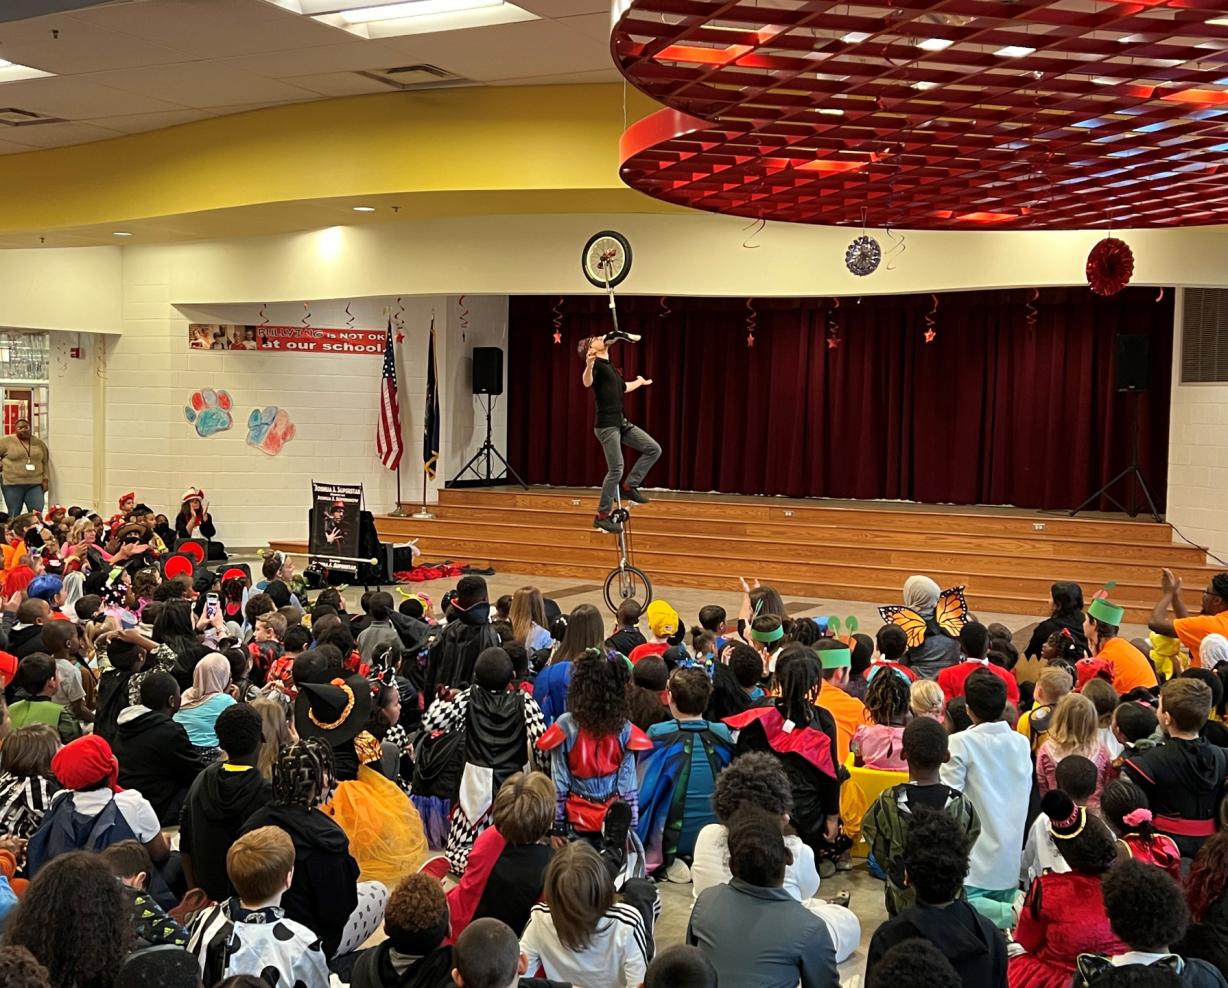 CirqOvation's Joshua J. Superstar rides a unicycle while holding another unicycle in his mouth in front of a packed cafeteria at Syracuse's Dr. Weeks School. The performance was coordinated by students in OCC's Phi Theta Kappa Honor Society.